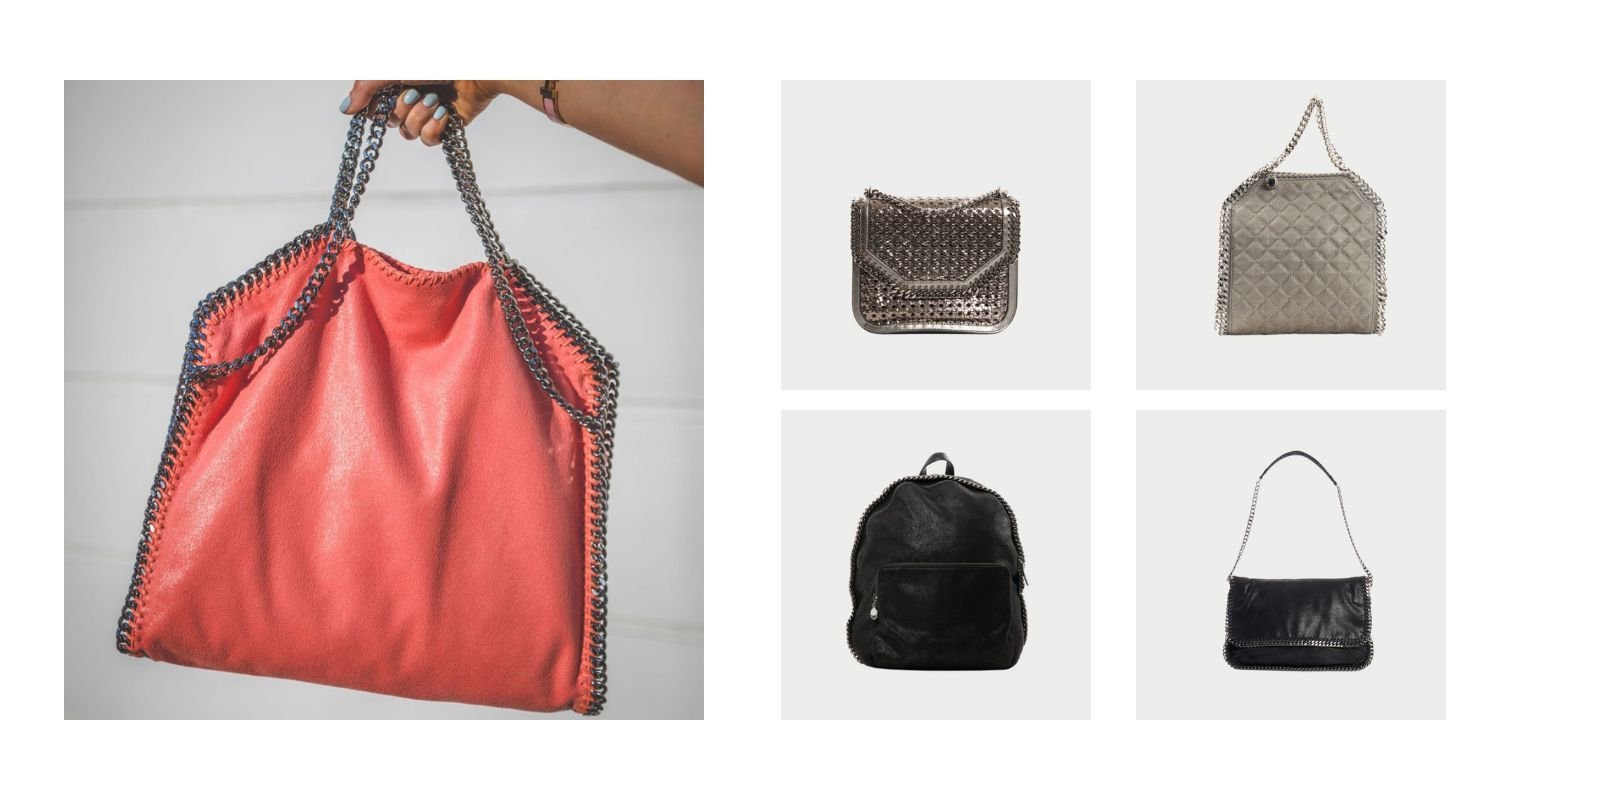 The Falabella range, crafted by Stella McCartney, continues to be a firm favourite in the fashion world with its beautifully crafted vegan leather and easily recognisable hardware